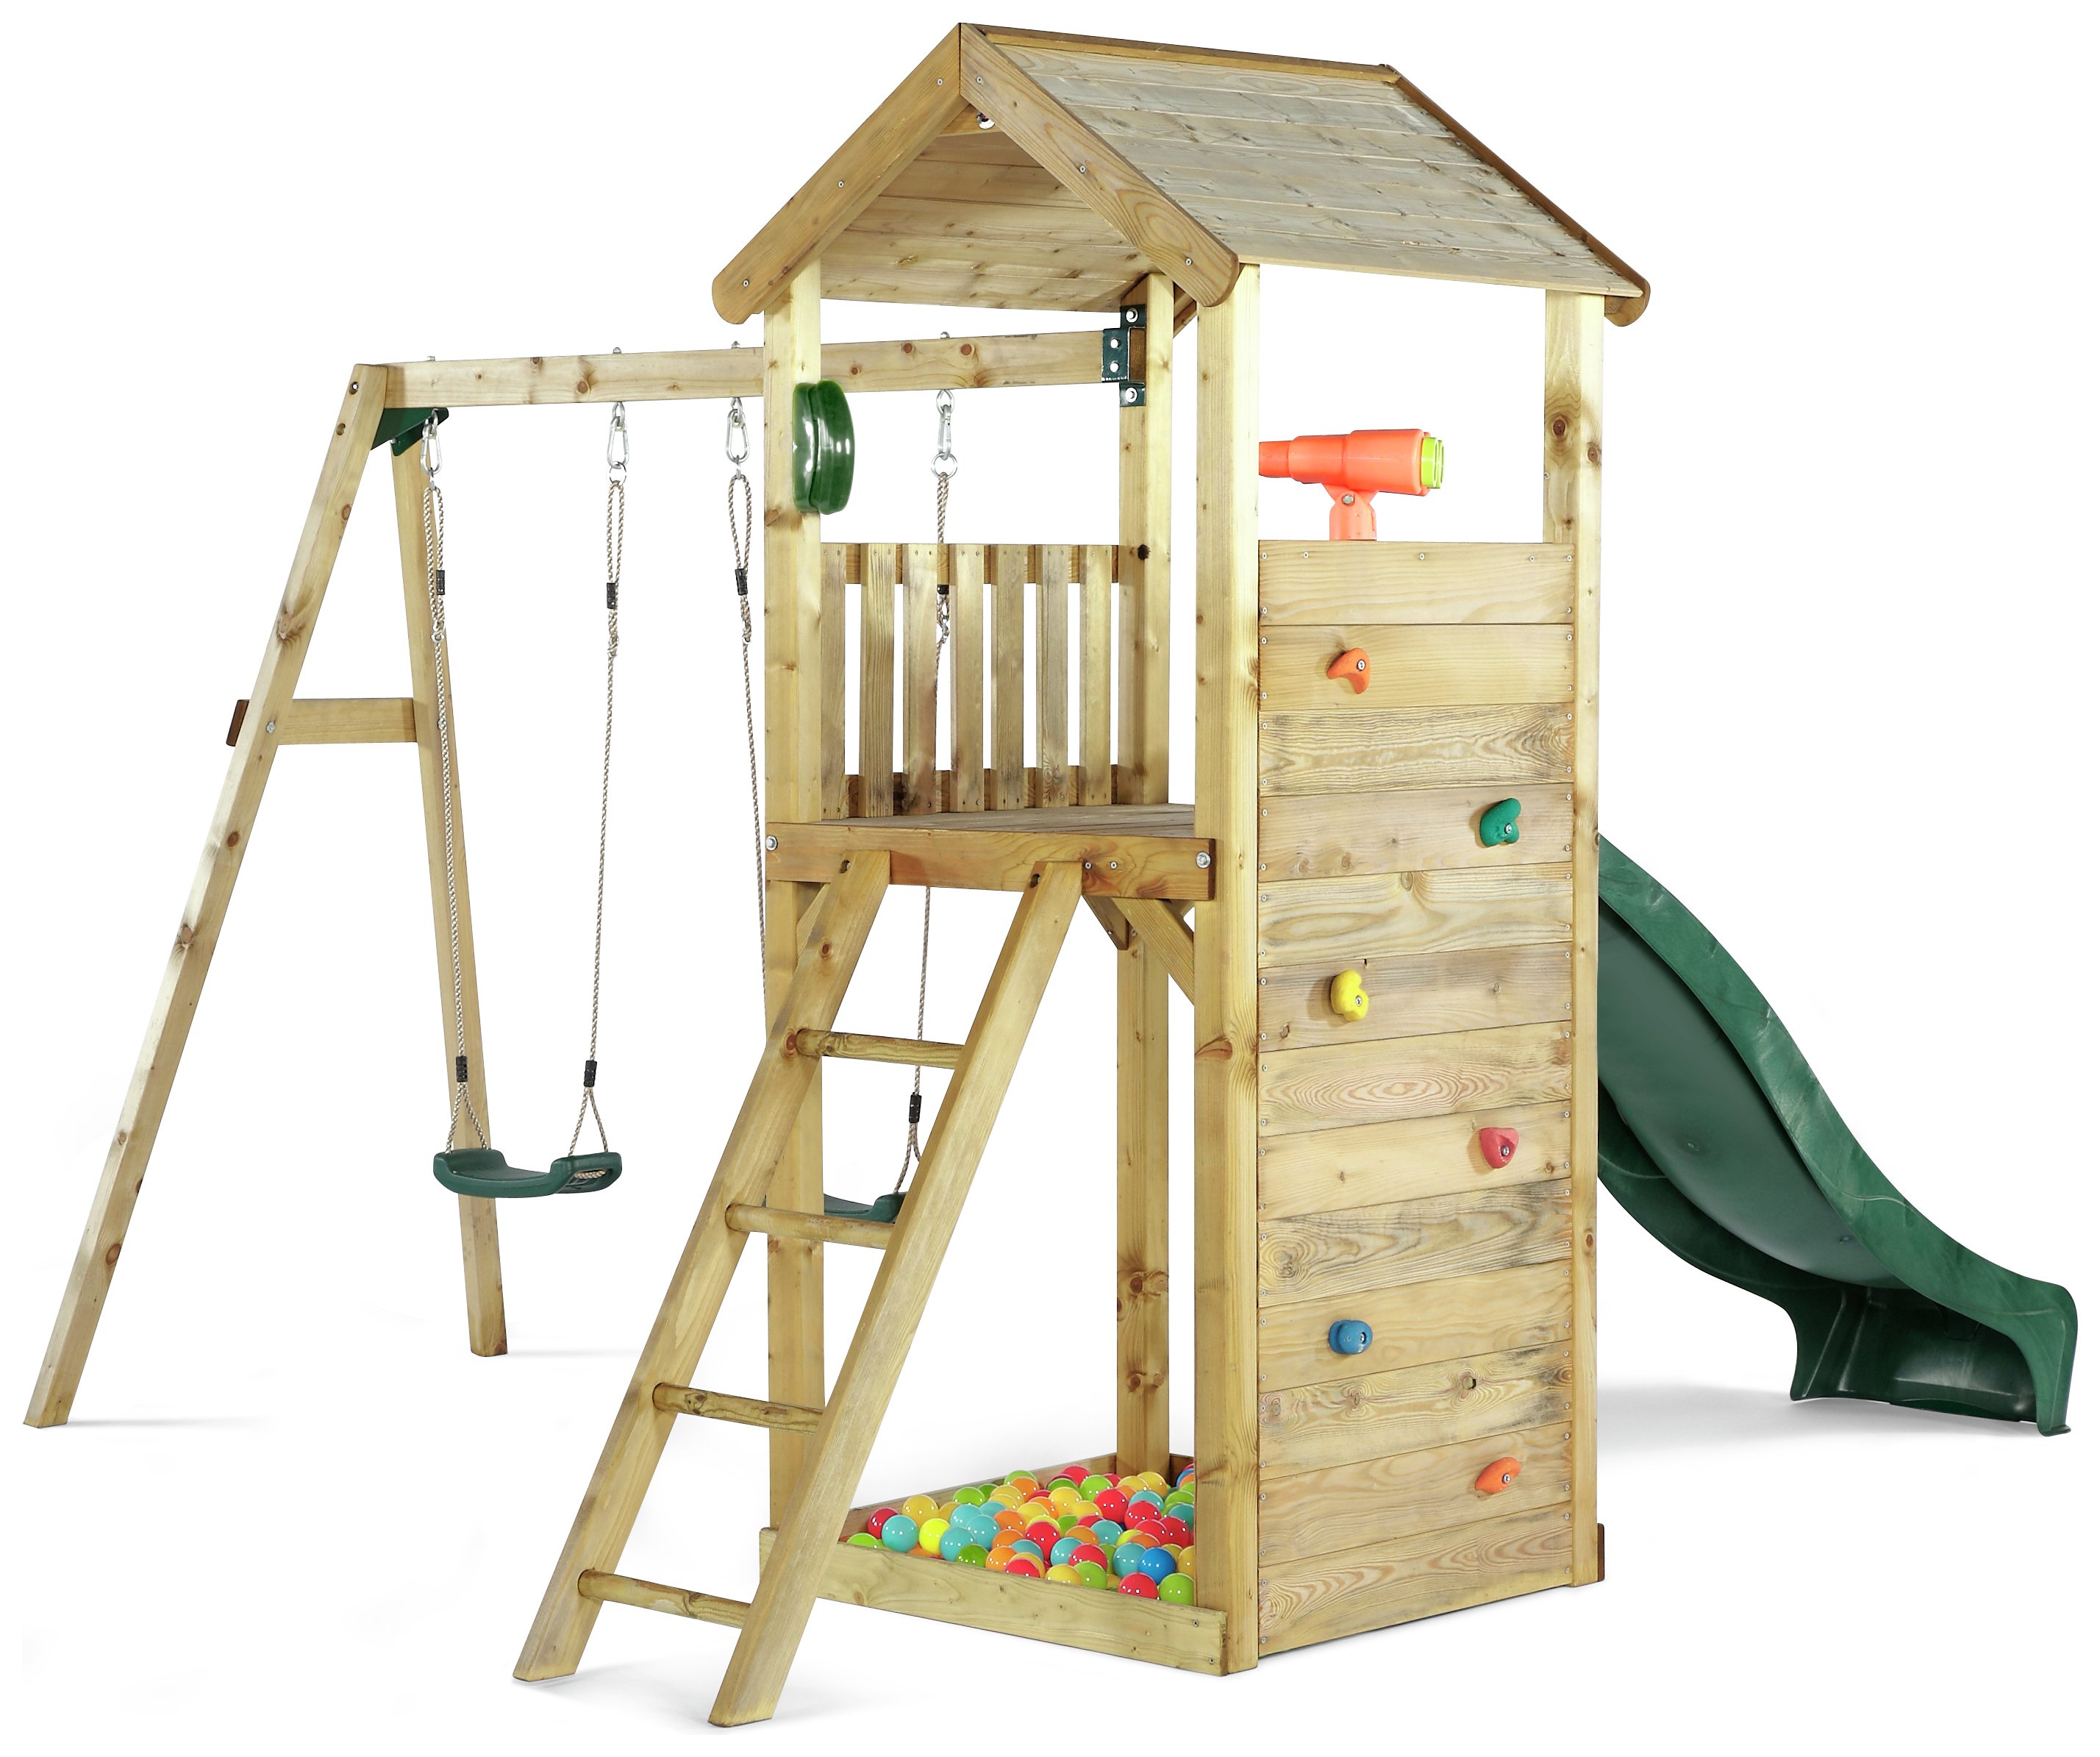 Plum Lookout Tower Wooden Climbing Frame with Swings & Slide Review